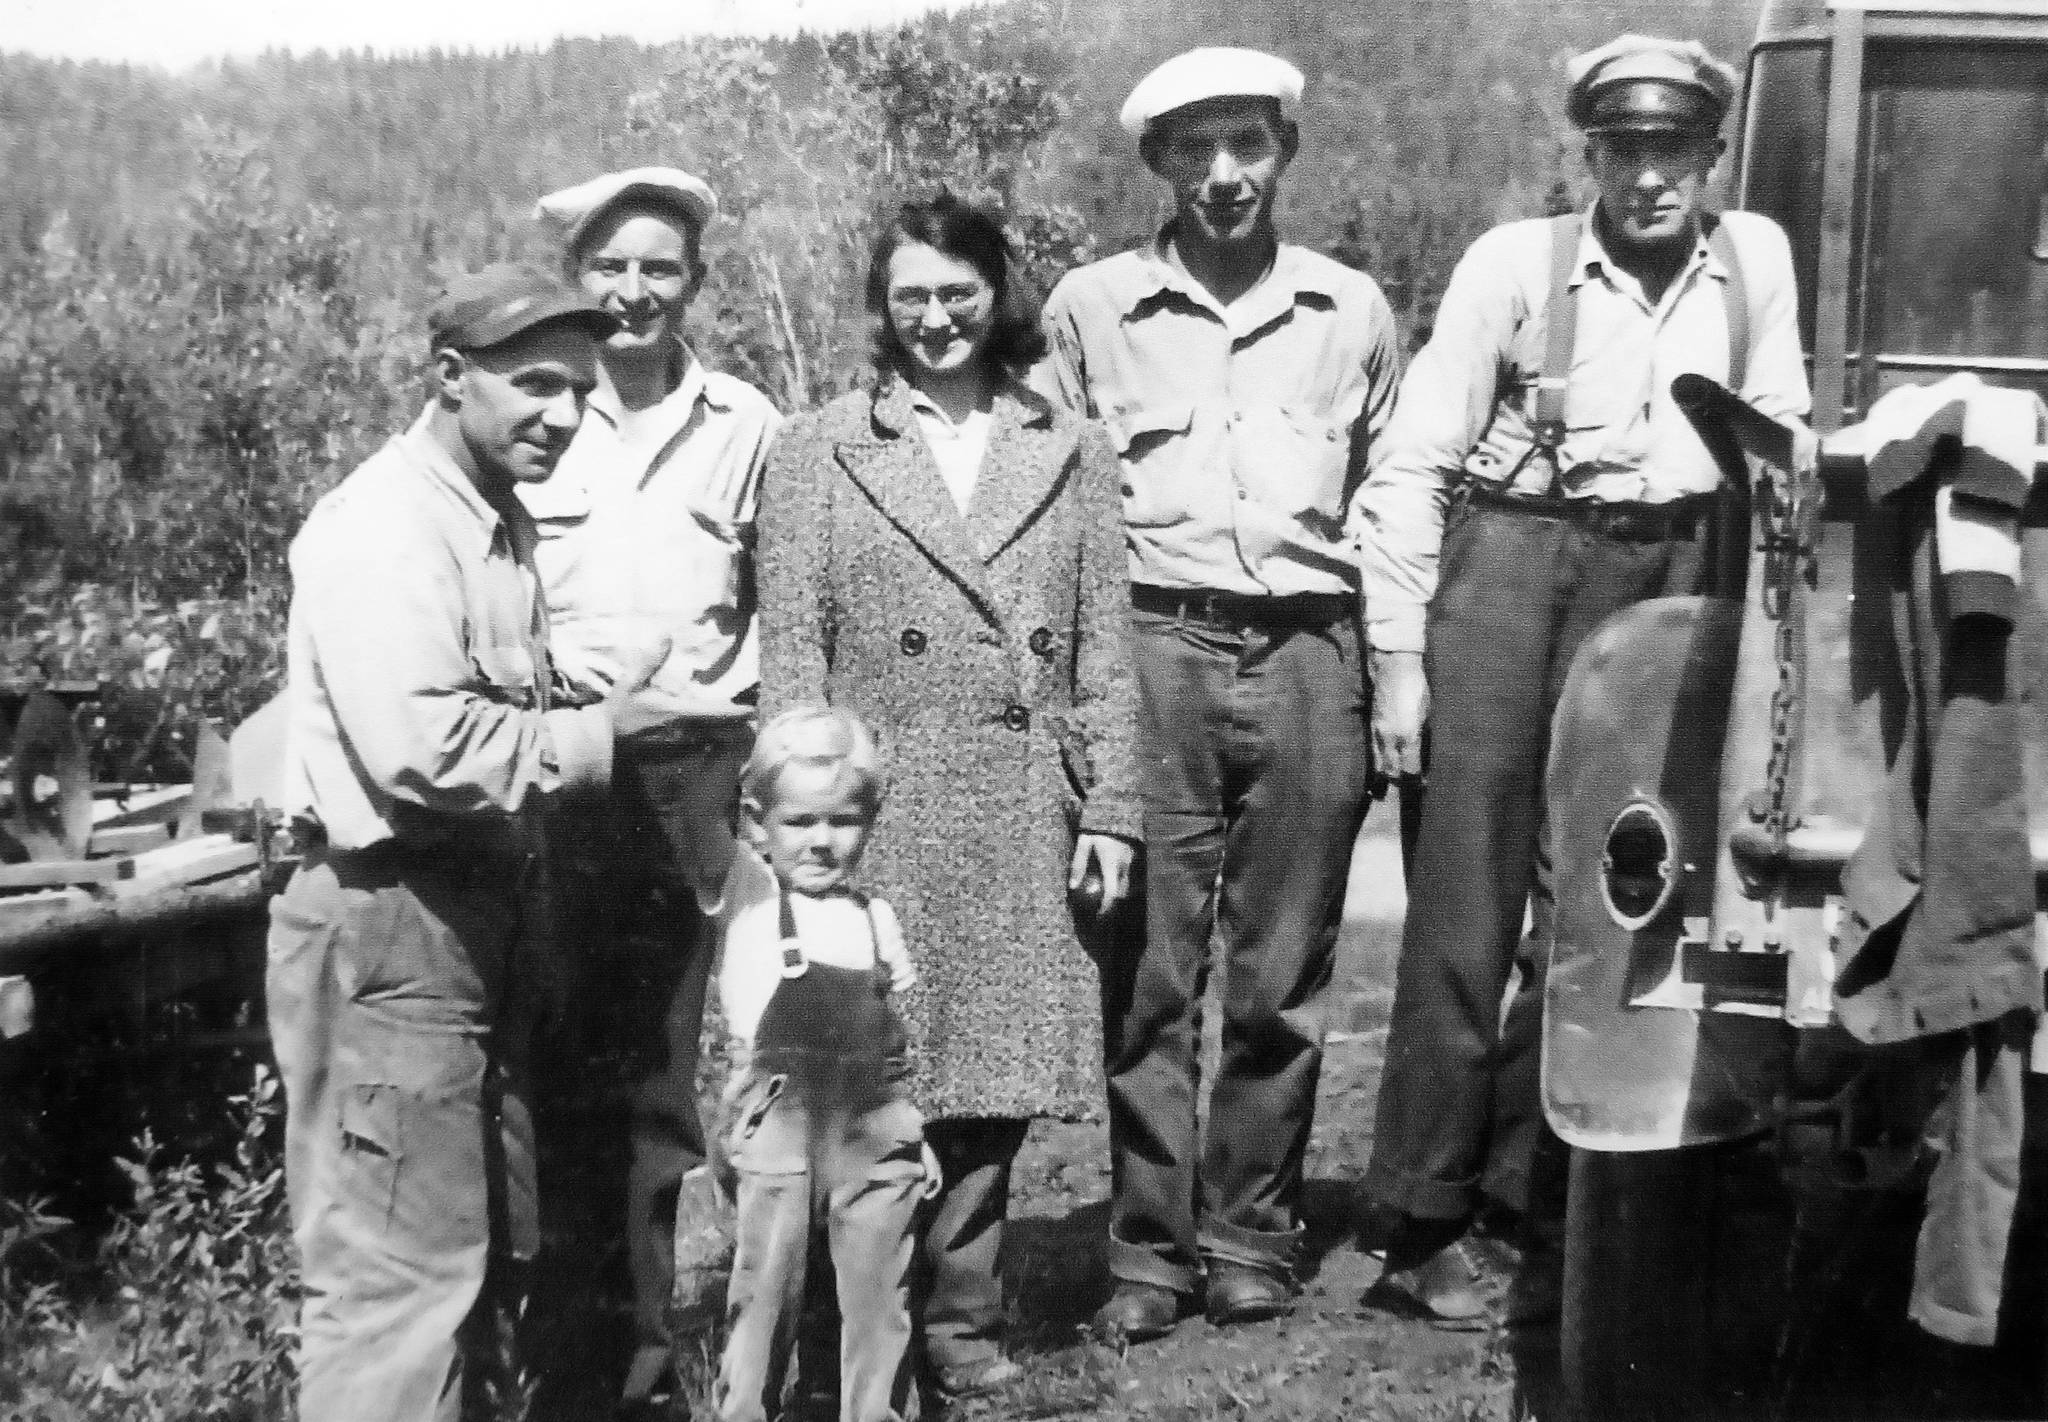 The Jims and friends. Little Jim (left) and Big Jim flank the others. In the center is Beverly Sabrowski, who, along with her husband, lived with the Jims in the 1930s. (Photo courtesy of Mona Painter)